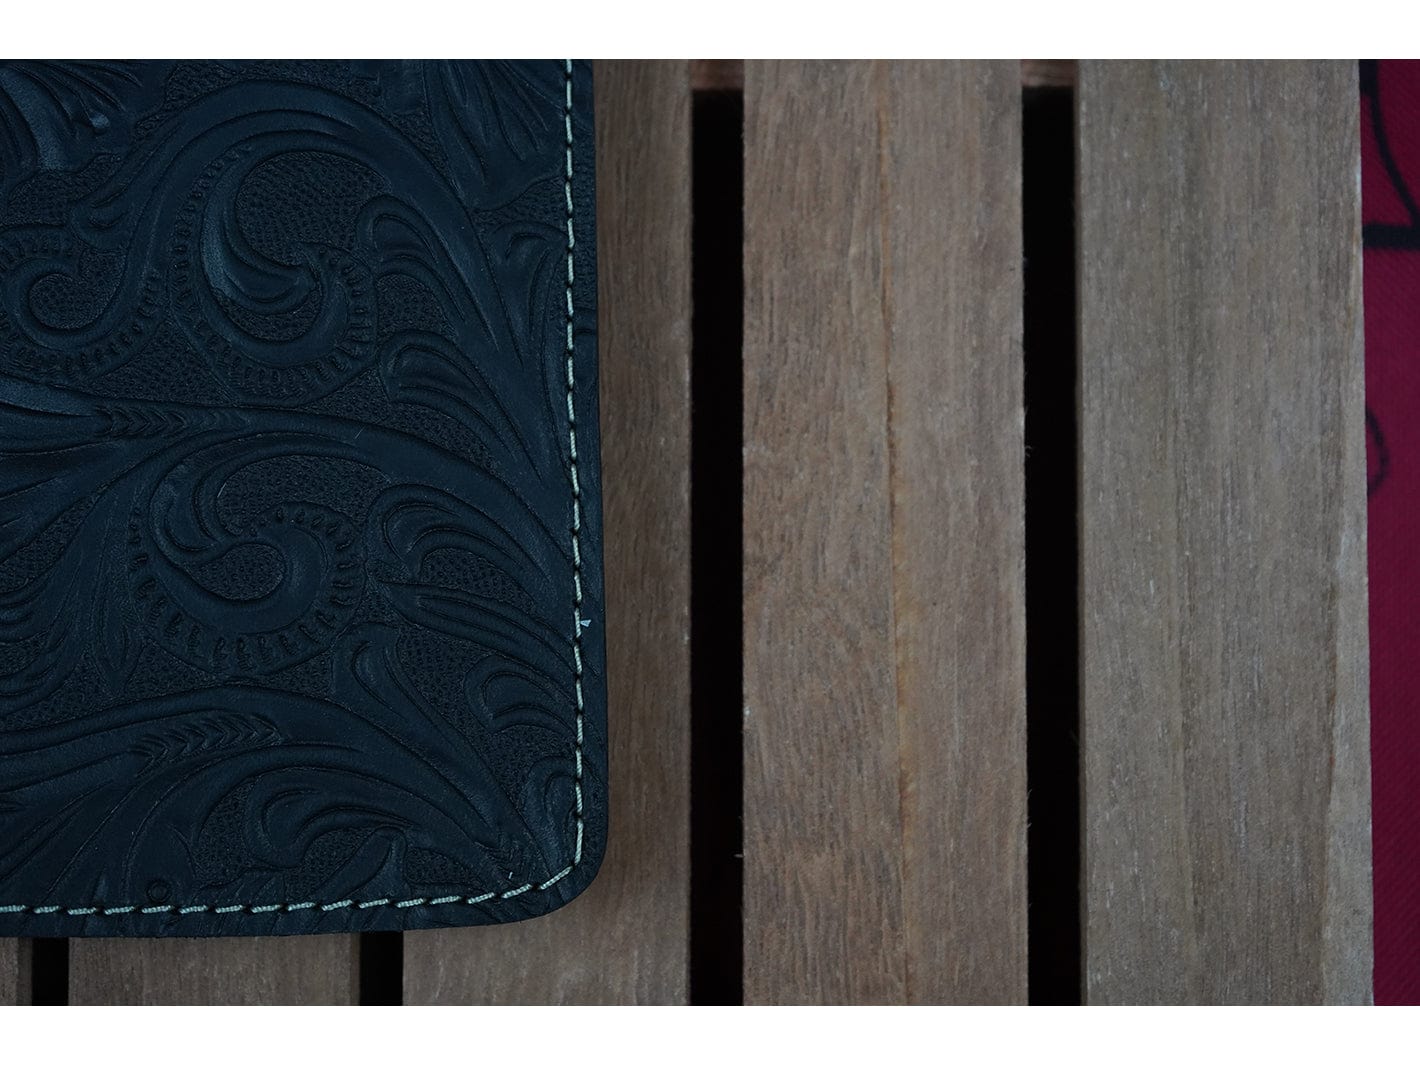 The Long Leather Wallet